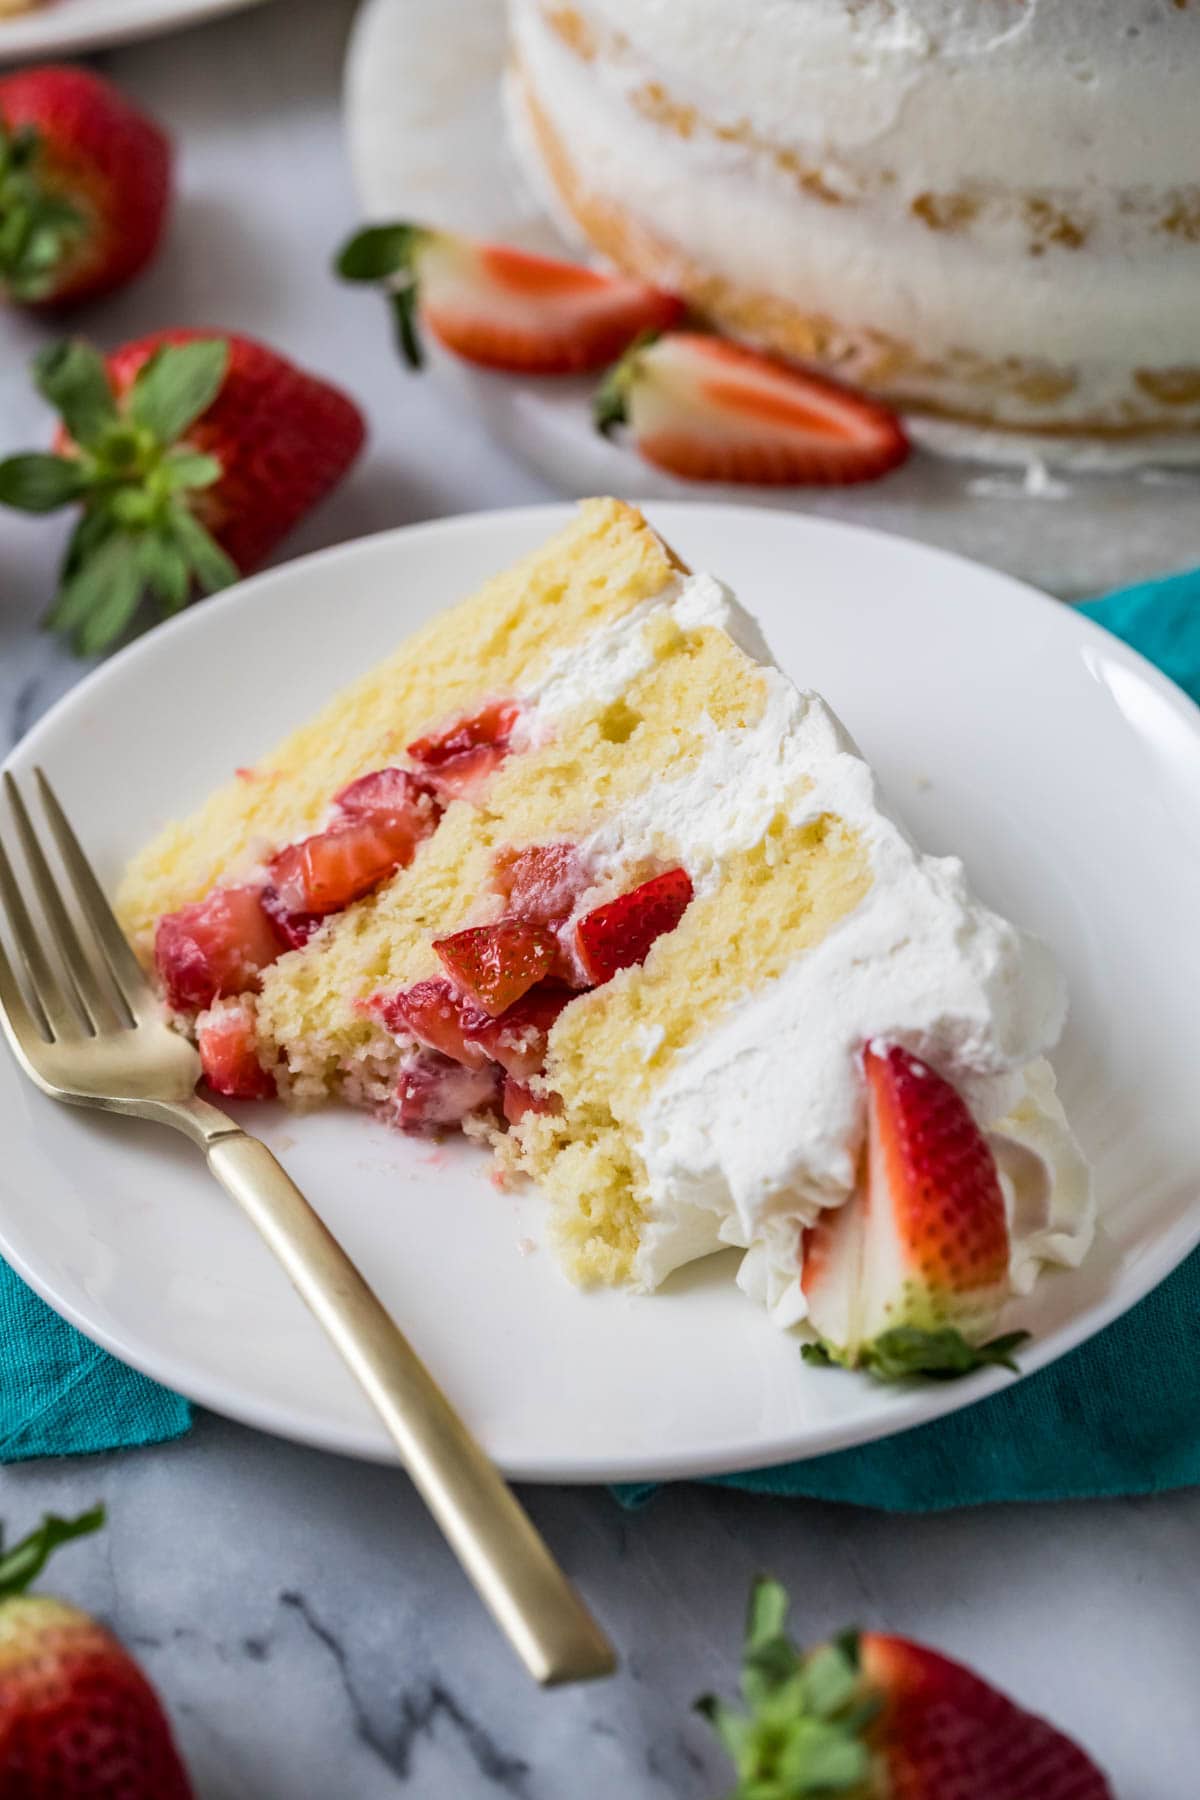 Slice of strawberry shortcake cake with several bites missing on a plate.